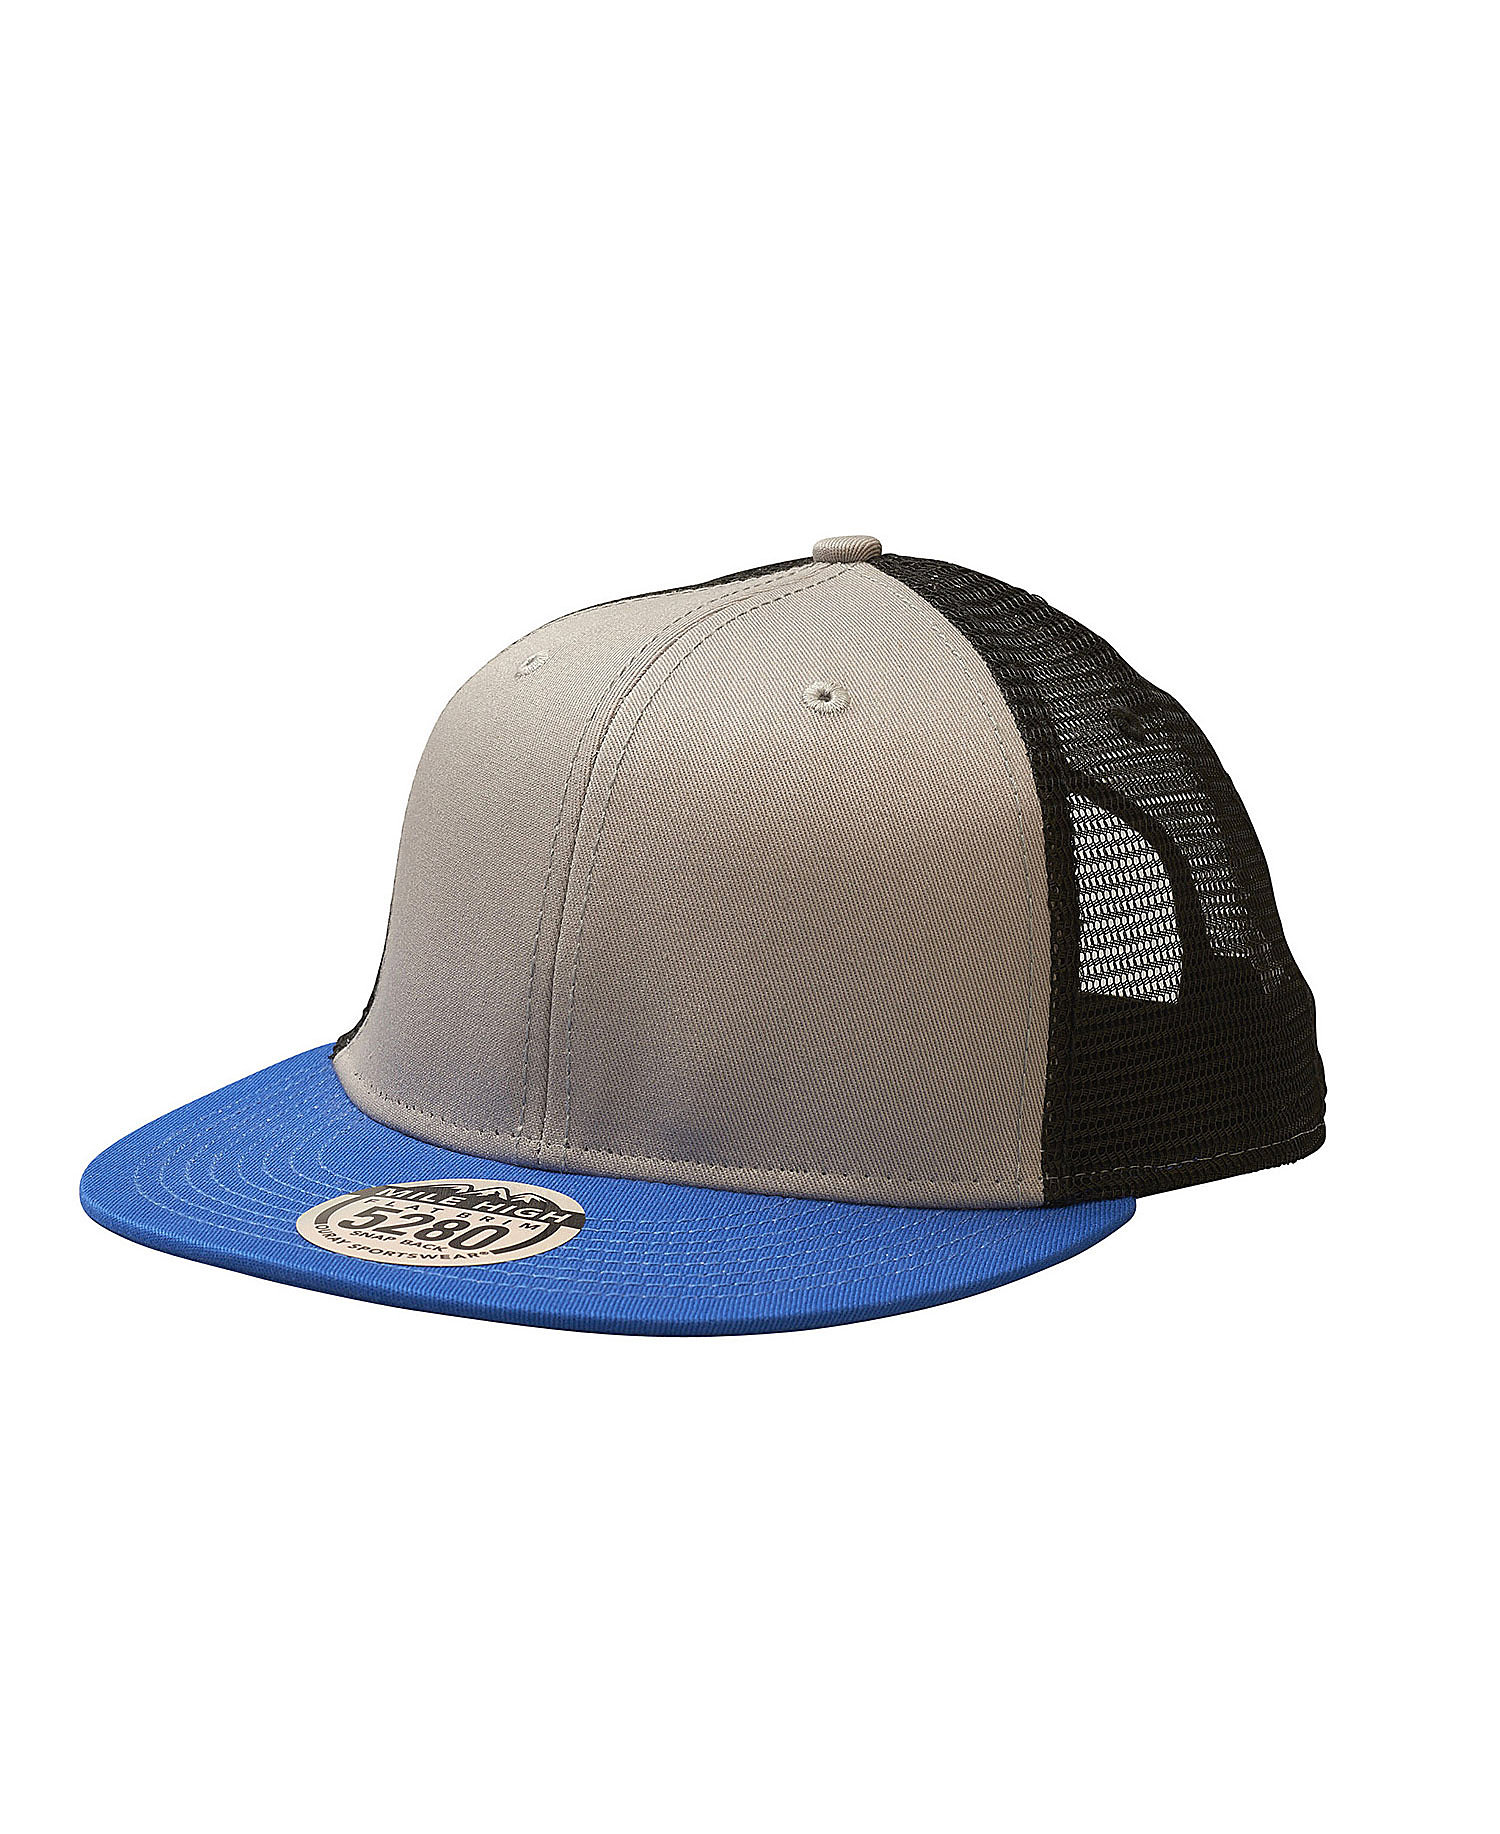 Ouray Sportswear Heather Performance Mesh Back Cap 